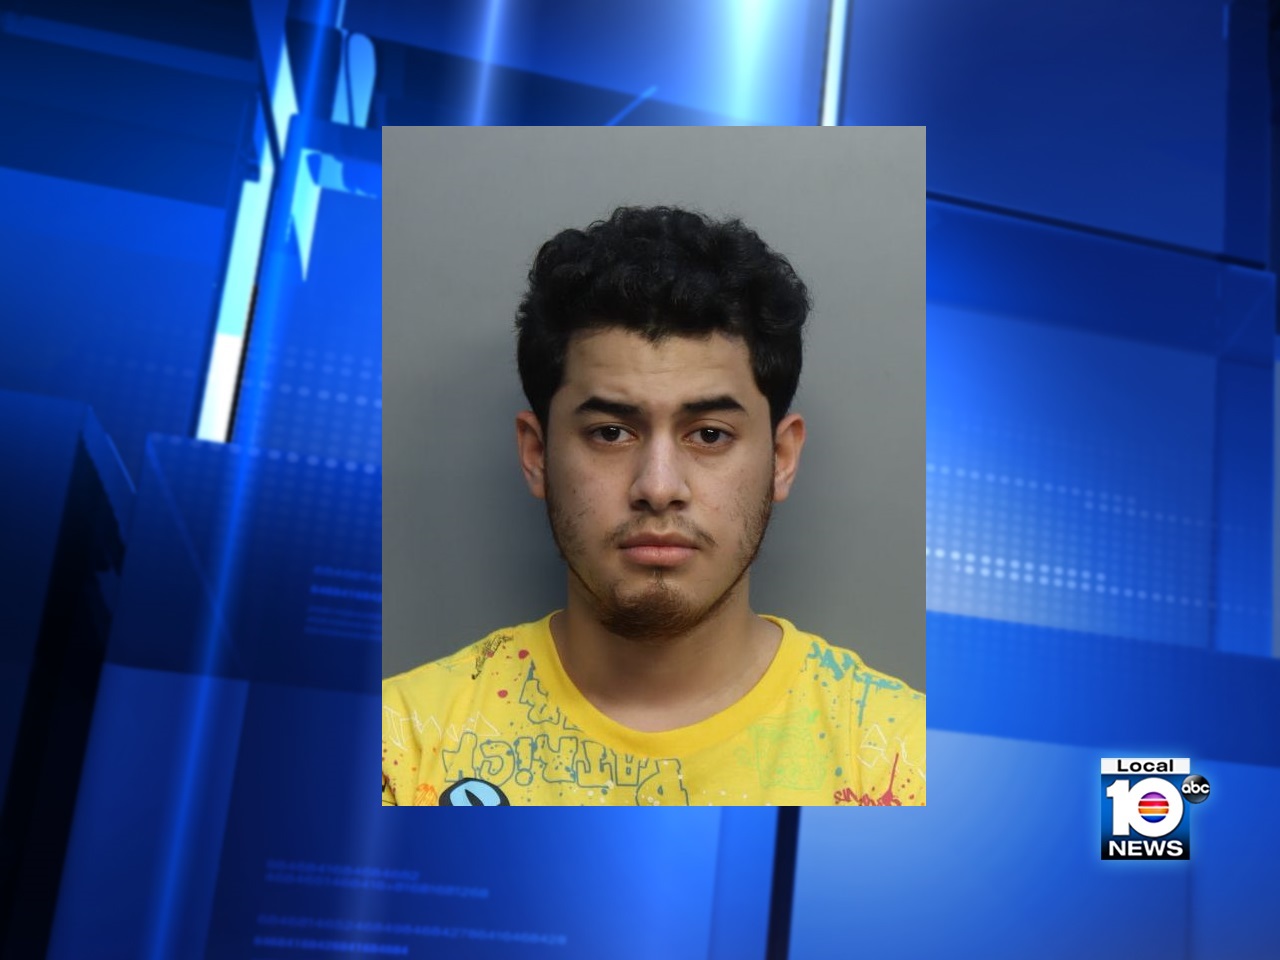 19-year-old arrested after allegedly uploading child porn to social media  accounts, police say